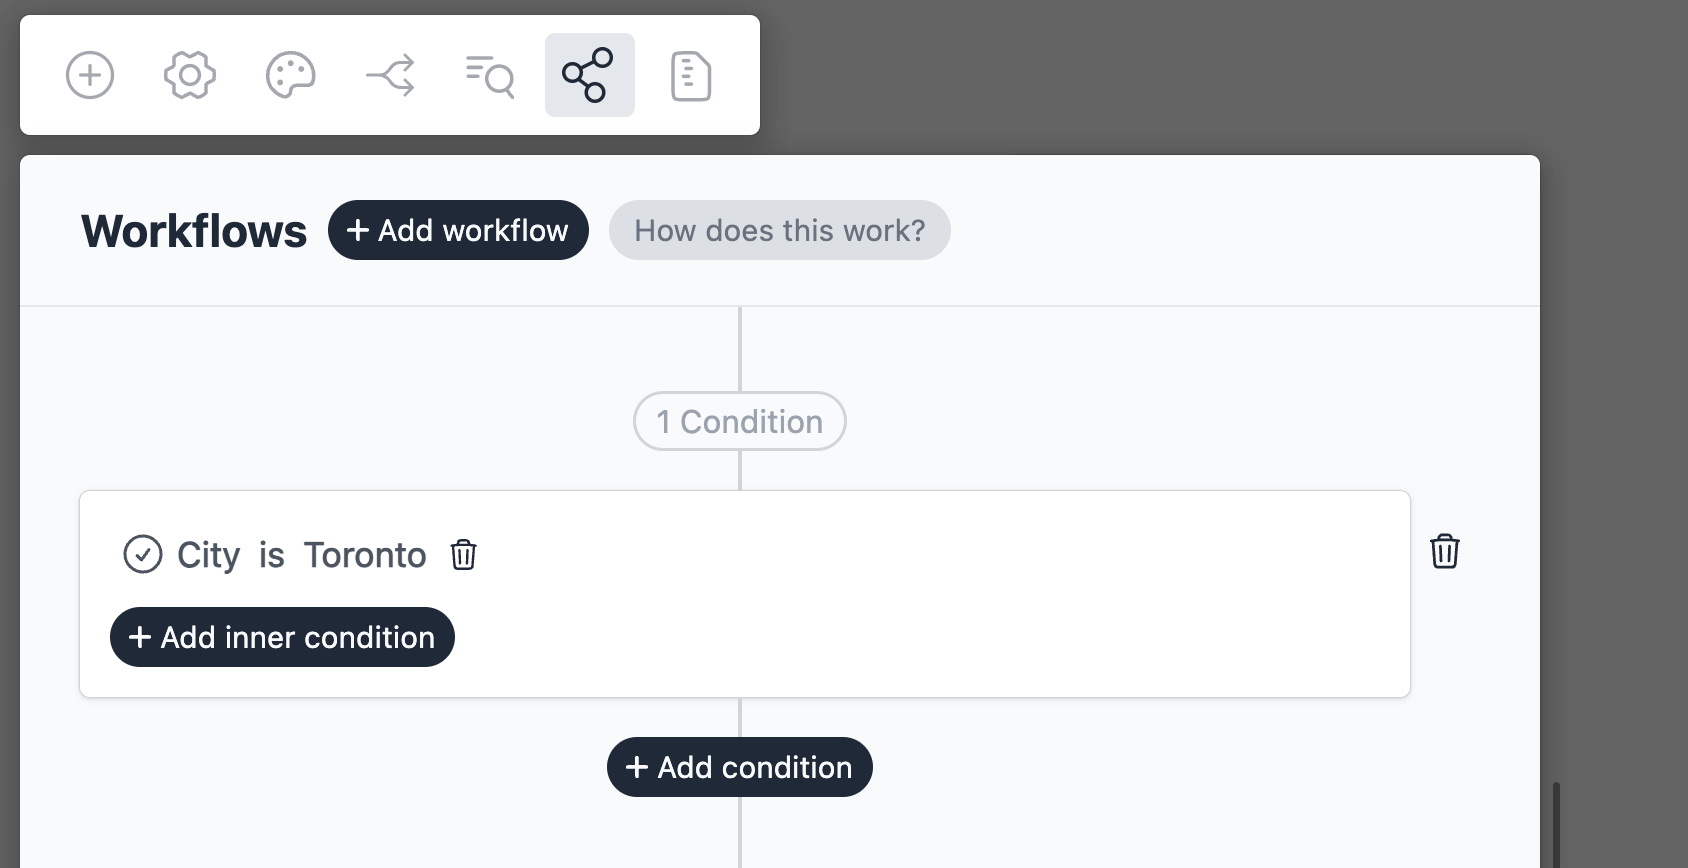 Workflow with a condition